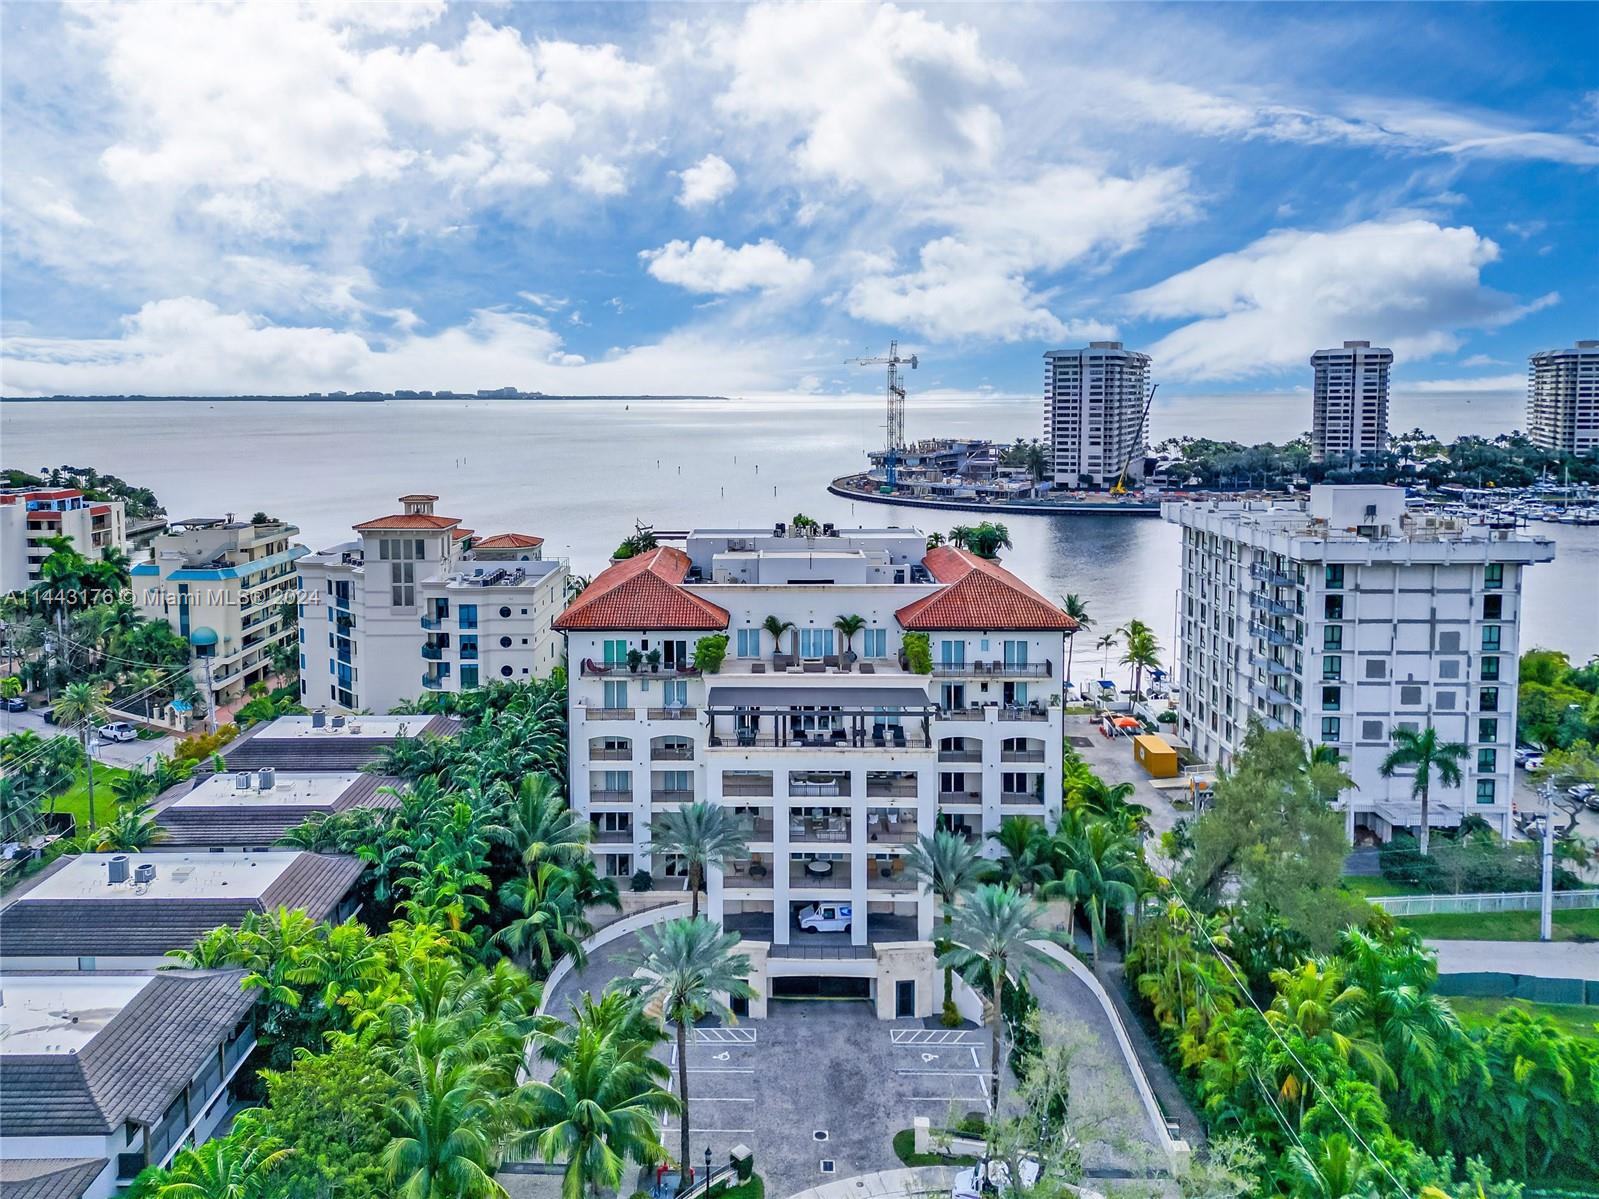 Private boutique building, unique unit w/spectacular water views of Biscayne Bay, total 18 private units in heart of Coconut Grove known as Residences at Vizcaya. Only unit for sale w/ boat slip included. Exclusive residence located on 2nd floor offers 4 bedrooms & 5.5 bathrooms, private elevator, foyer, open floor plan w/ high ceilings, European style kitchen, marble & dark wood floors throughout, family room, laundry room, spacious terrace w/ summer kitchen built in BBQ, one of the only units that features own private heated pool overlooking the bay.Covered parking garage -2 parking spaces &2 car lifts. 24 HR concierge, private marina, community lap pool, small gym. Pet friendly. Steele Mini park directly downstairs. Walkability & bike trails nearby. Next to HCA Mercy Hospital.